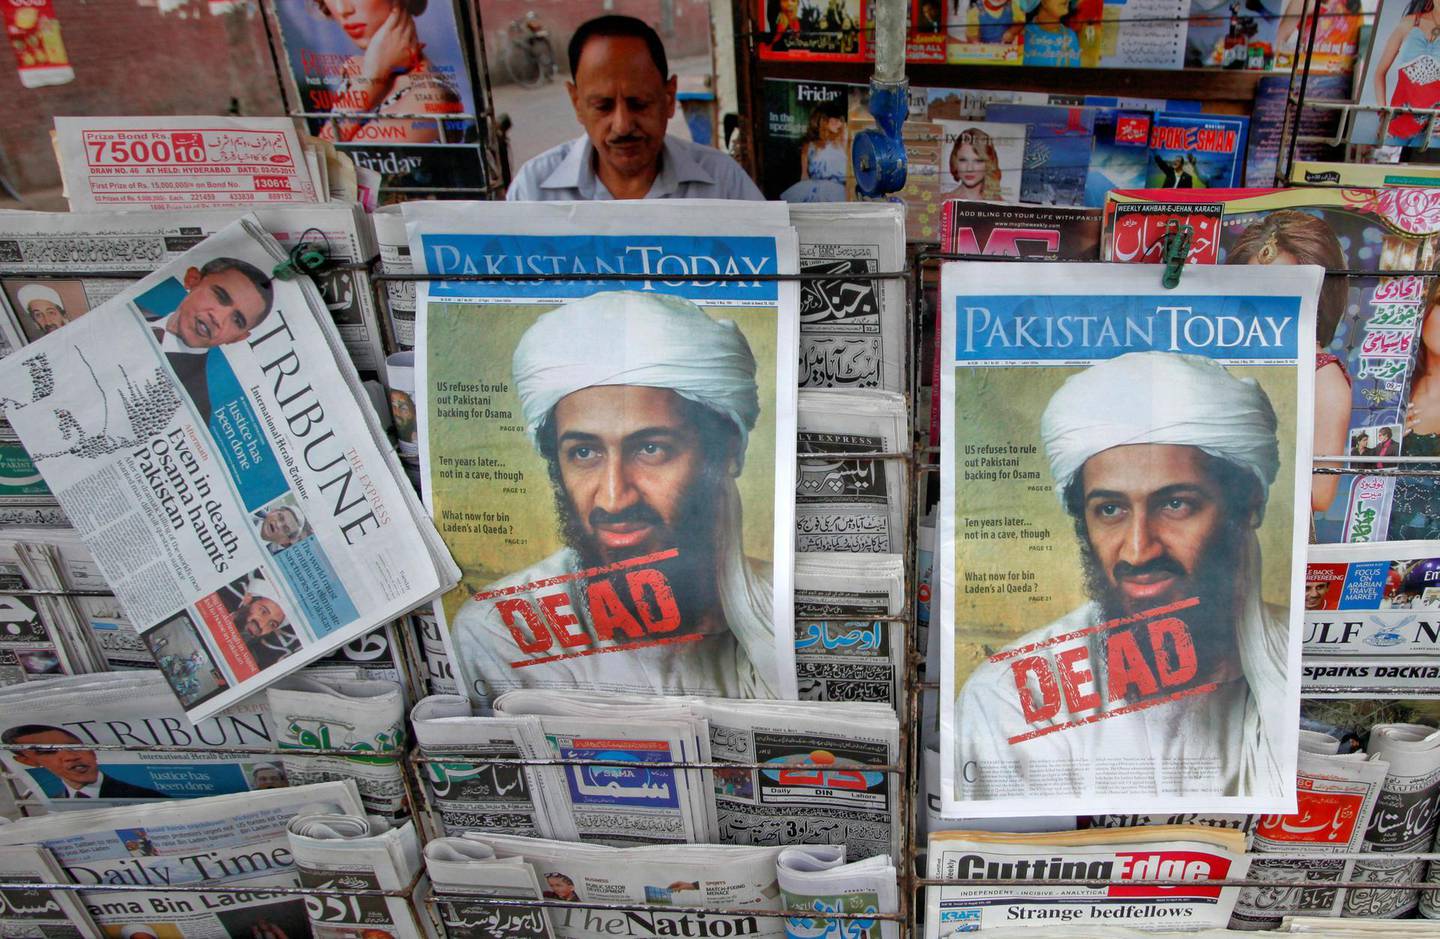 FILE PHOTO: A roadside vendor sells newspapers with headlines about the death of al Qaeda leader Osama bin Laden, in Lahore May 3, 2011.  REUTERS/Mohsin Raza/File Photo